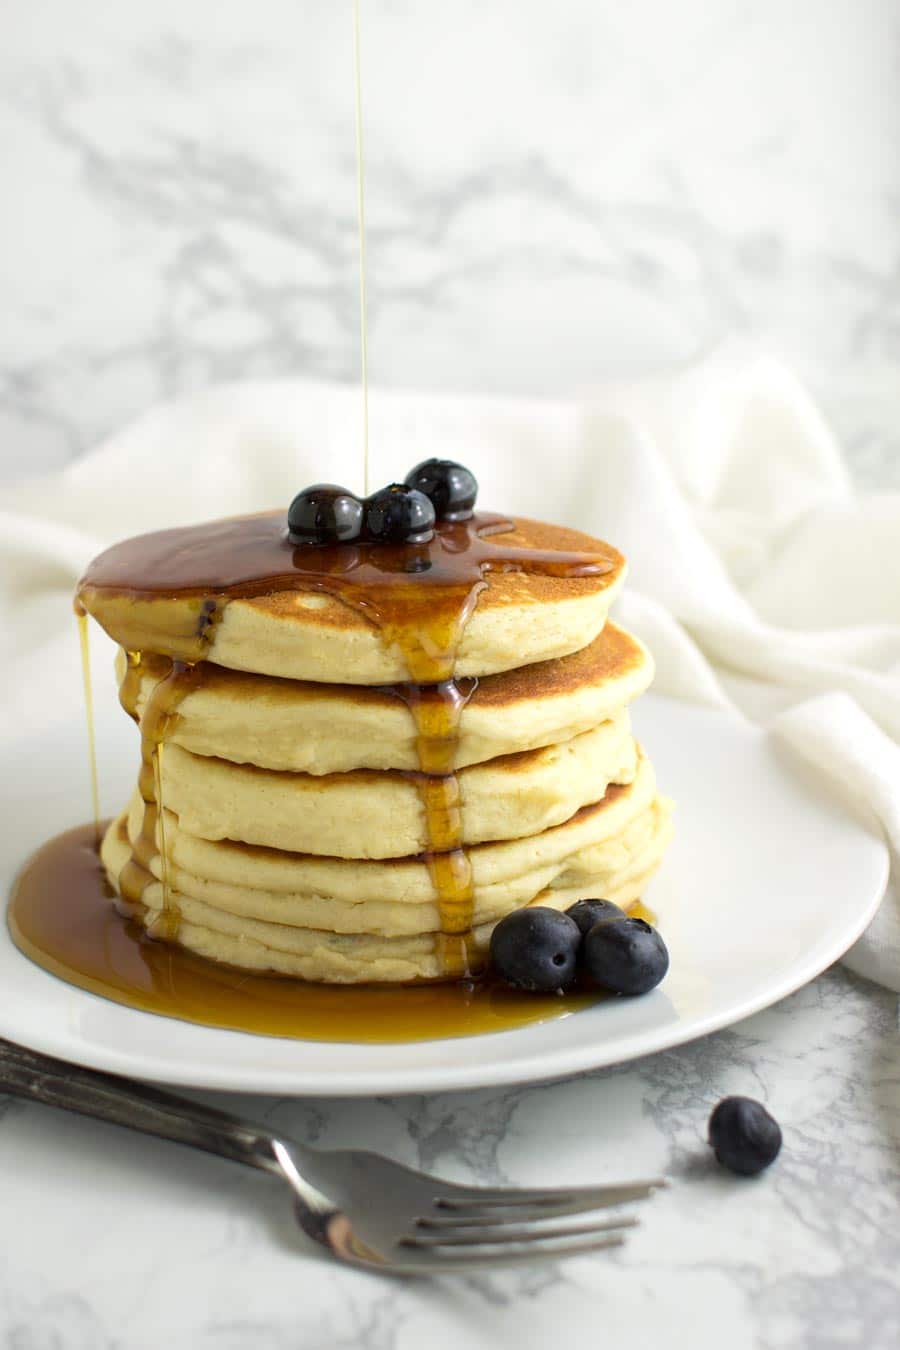 Blueberry Pancakes recipe from acleanplate.com #paleo #healthy #breakfast